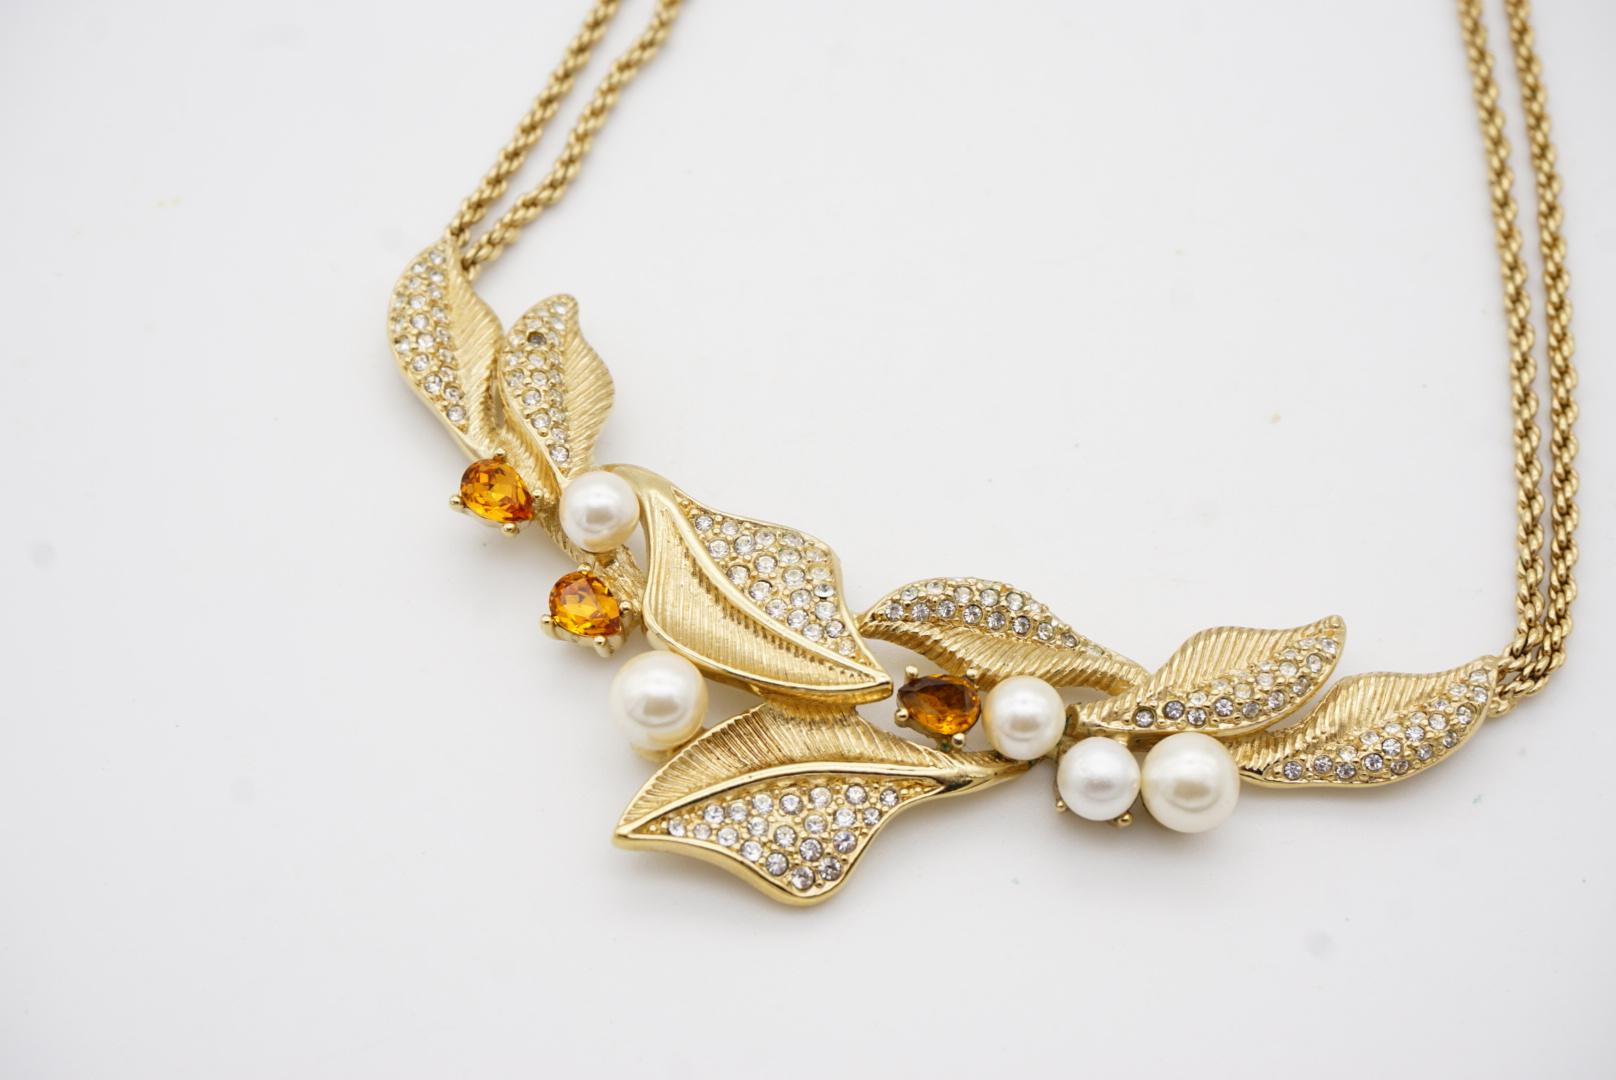 Christian Dior GROSSE Vintage Strand Leaf Yellow Crystal Pearl Pendant Necklace For Sale 3